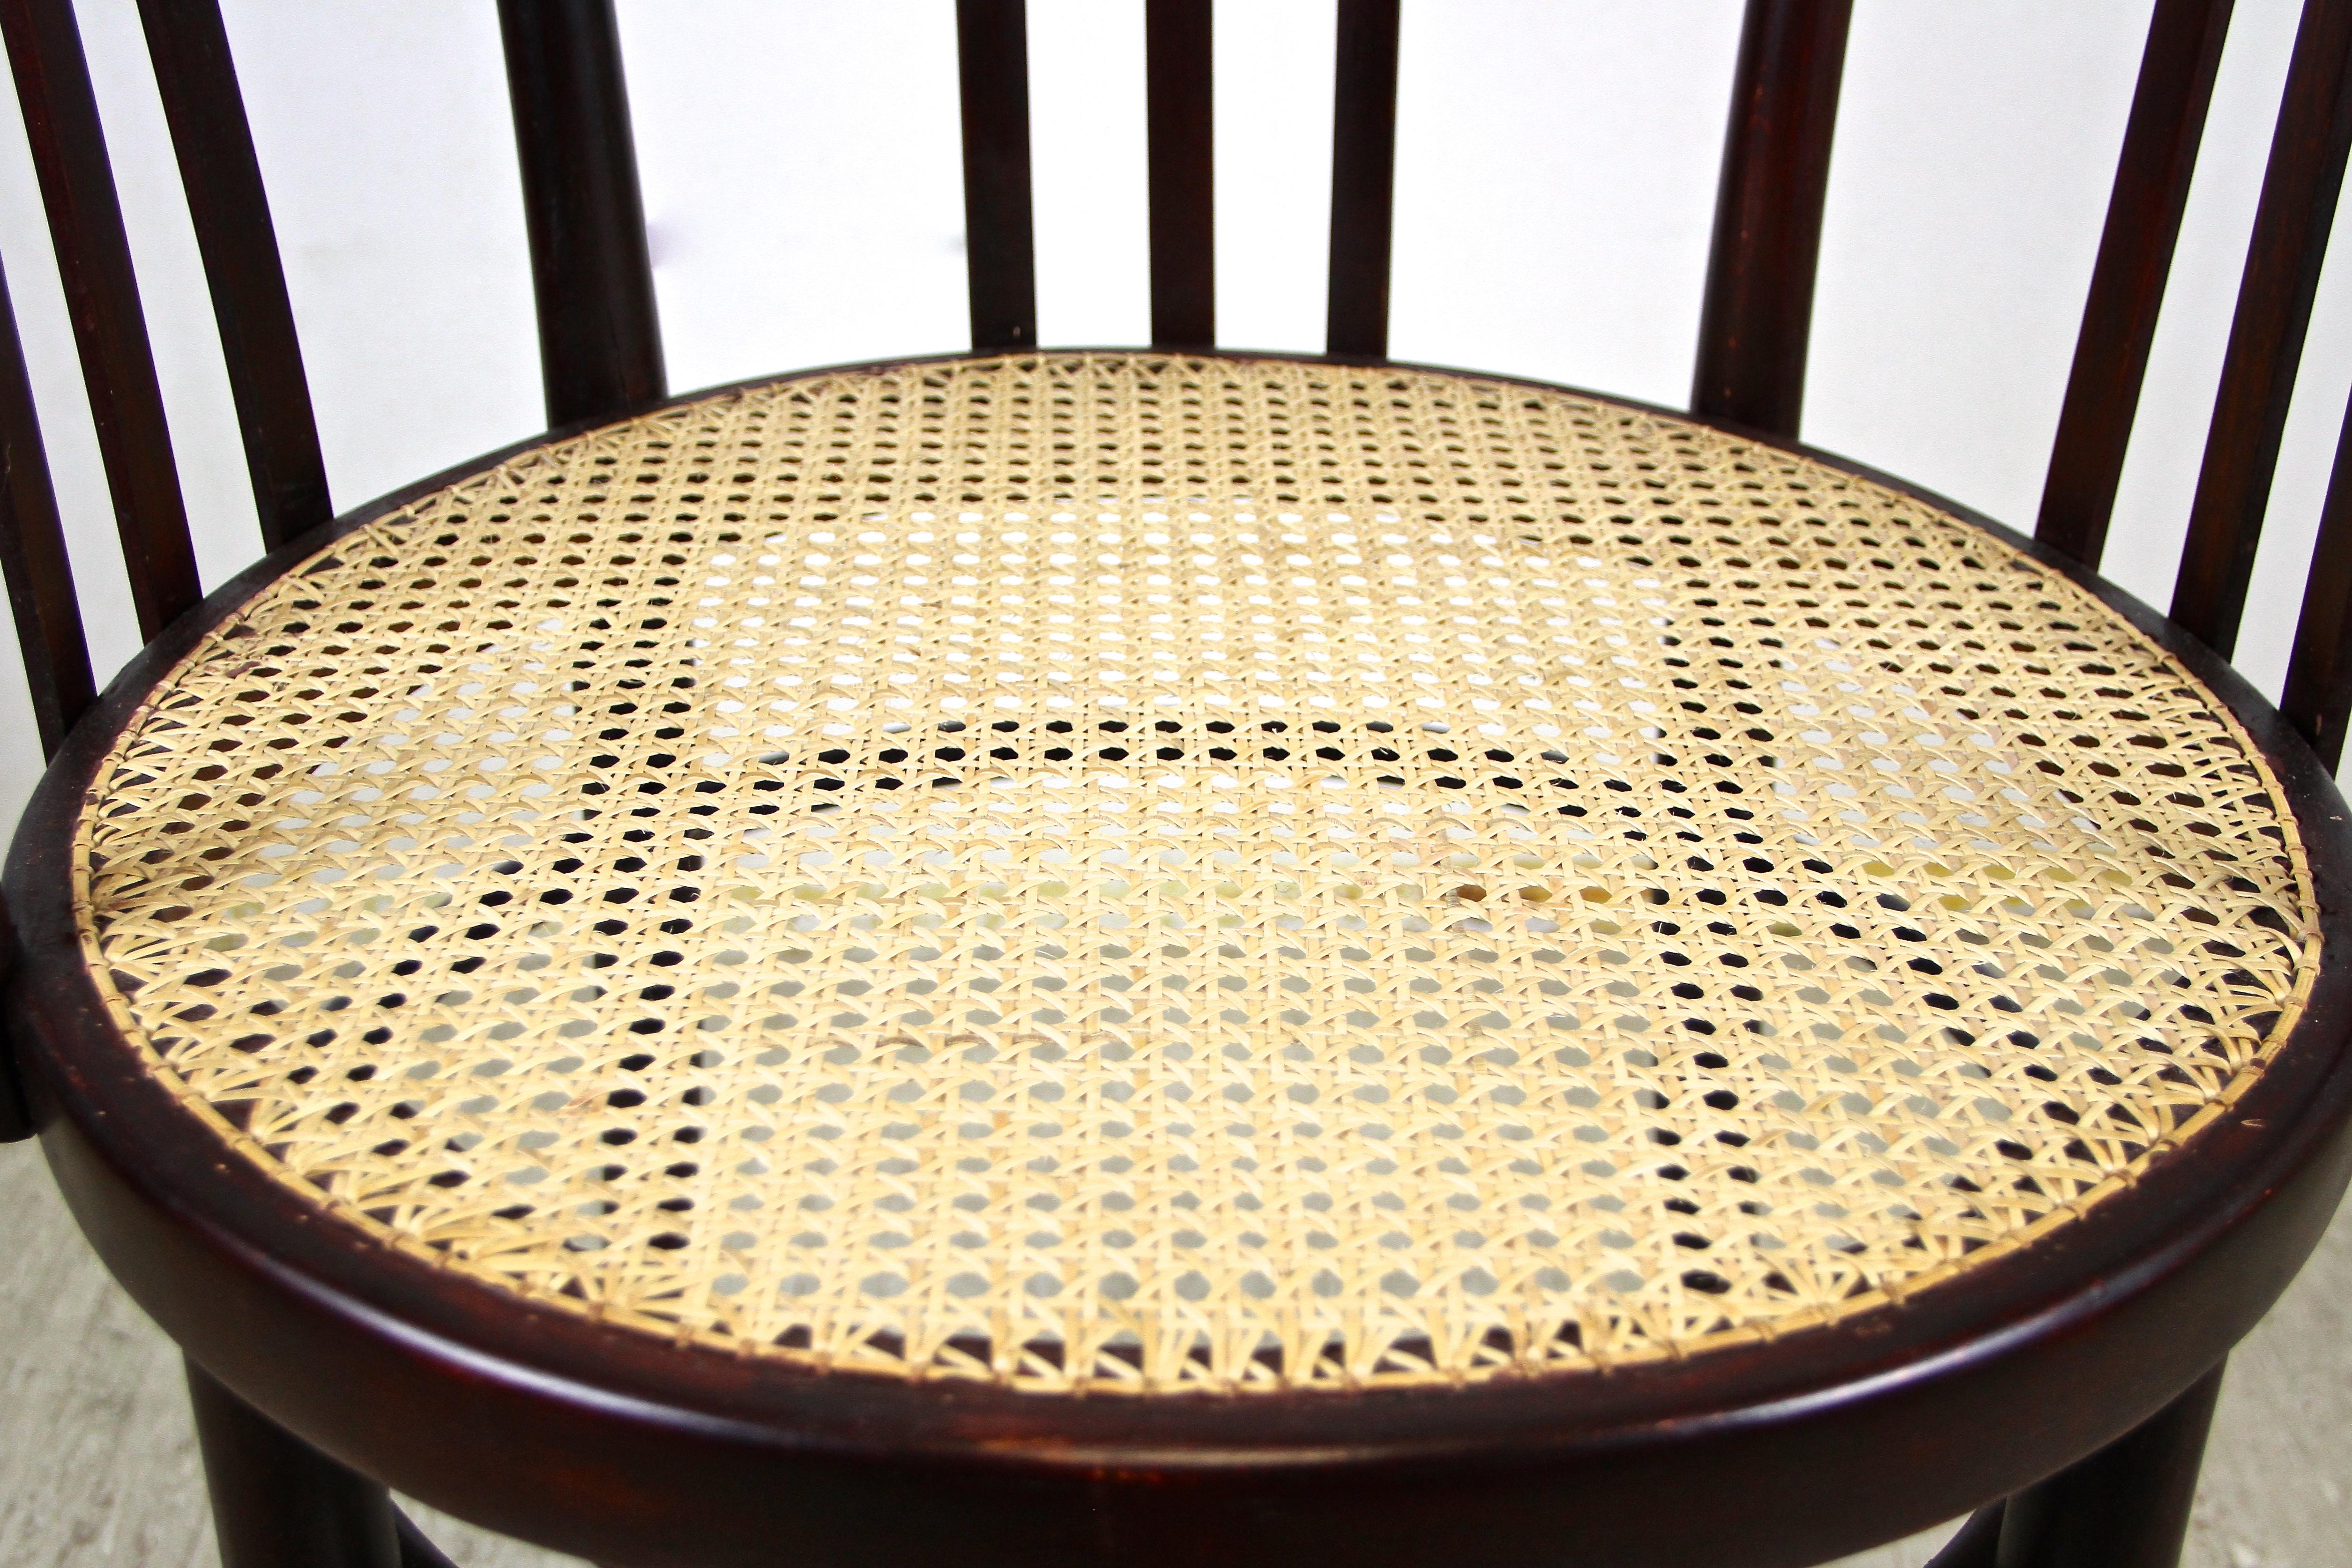 20th Century Bentwood Armchair with Vienesse Mesh by Mundus, Austria circa 1906 For Sale 2